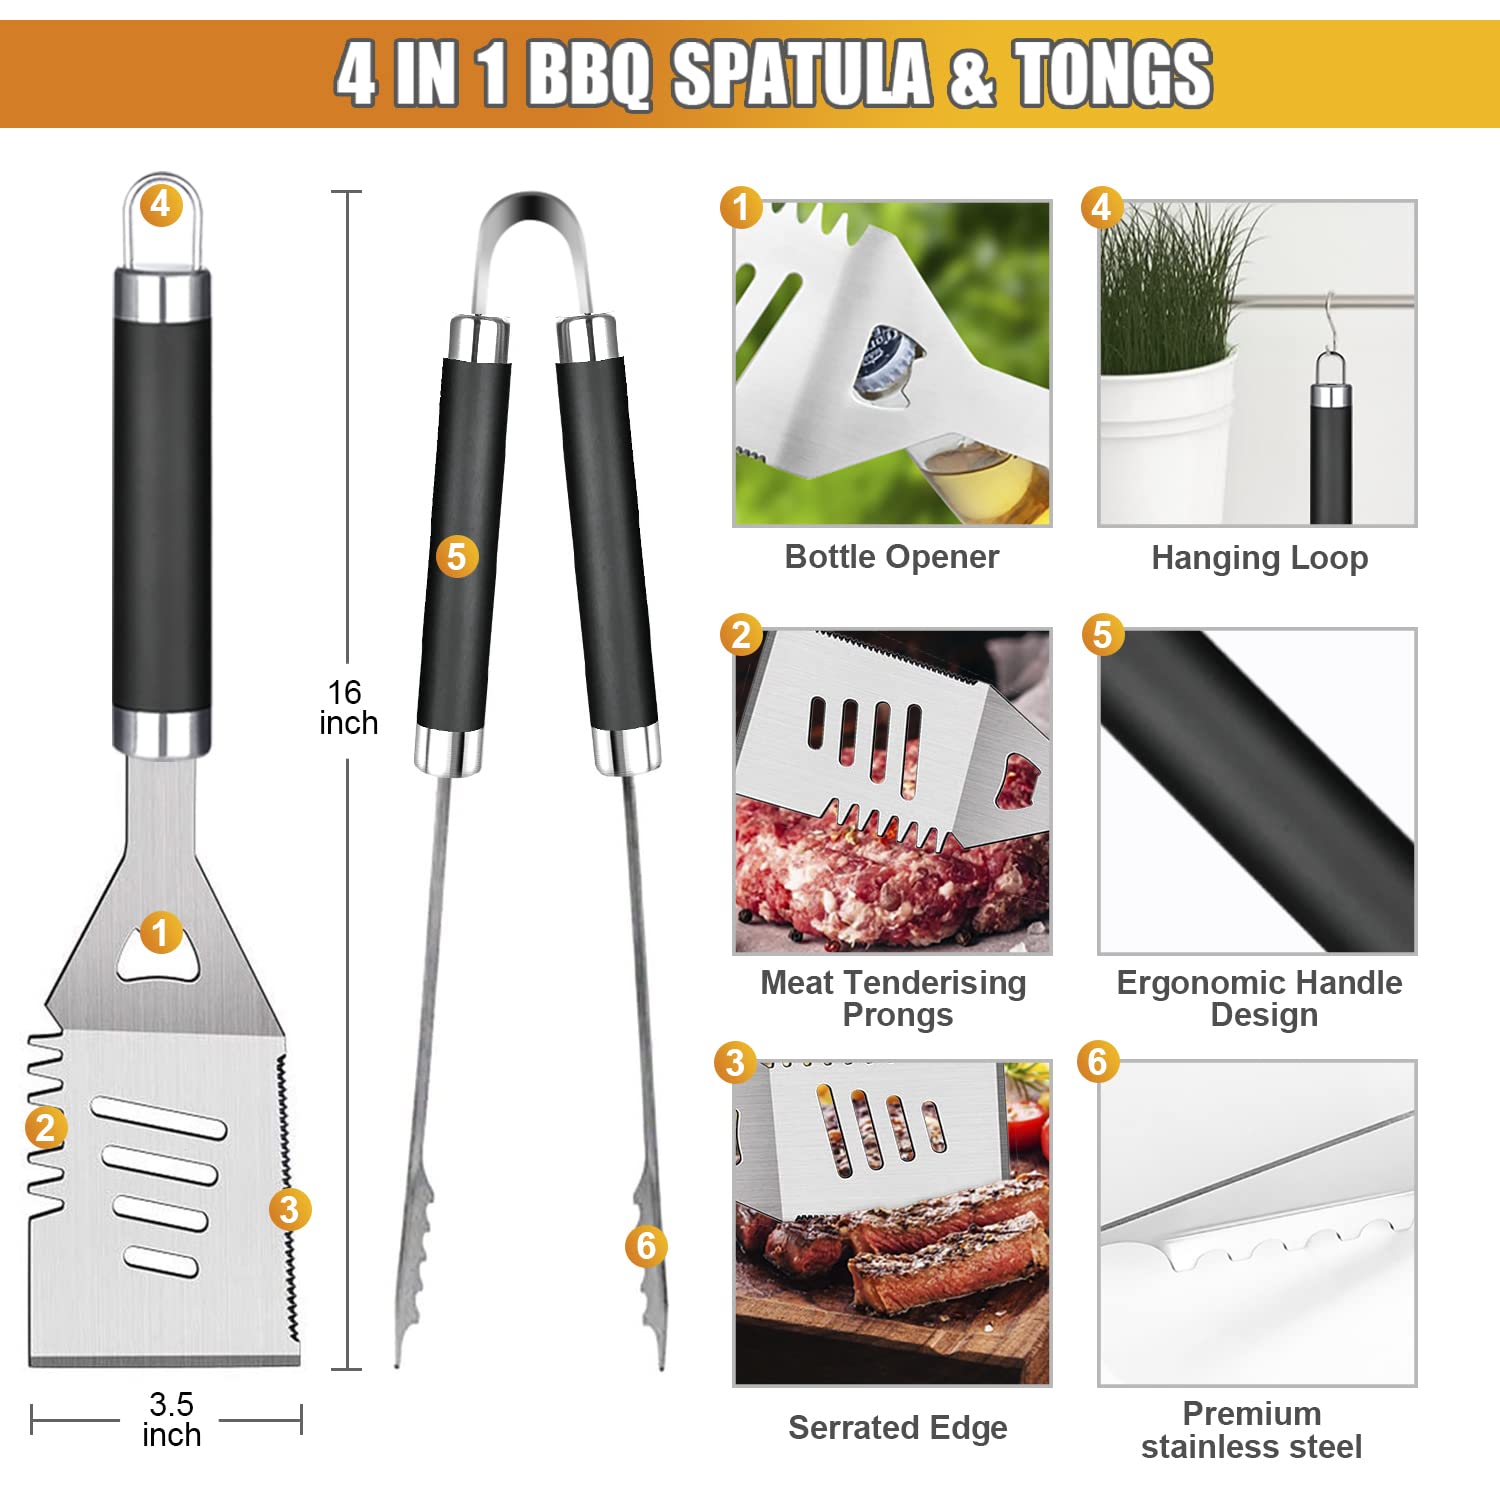 BBQ Grill Accessories Set, 38Pcs Stainless Steel Grill Tools Grilling Accessories with Aluminum Case, Thermometer, Grill Mats for Camping/Backyard Barbecue, Grill Utensils Set for Men Women - image 5 of 7